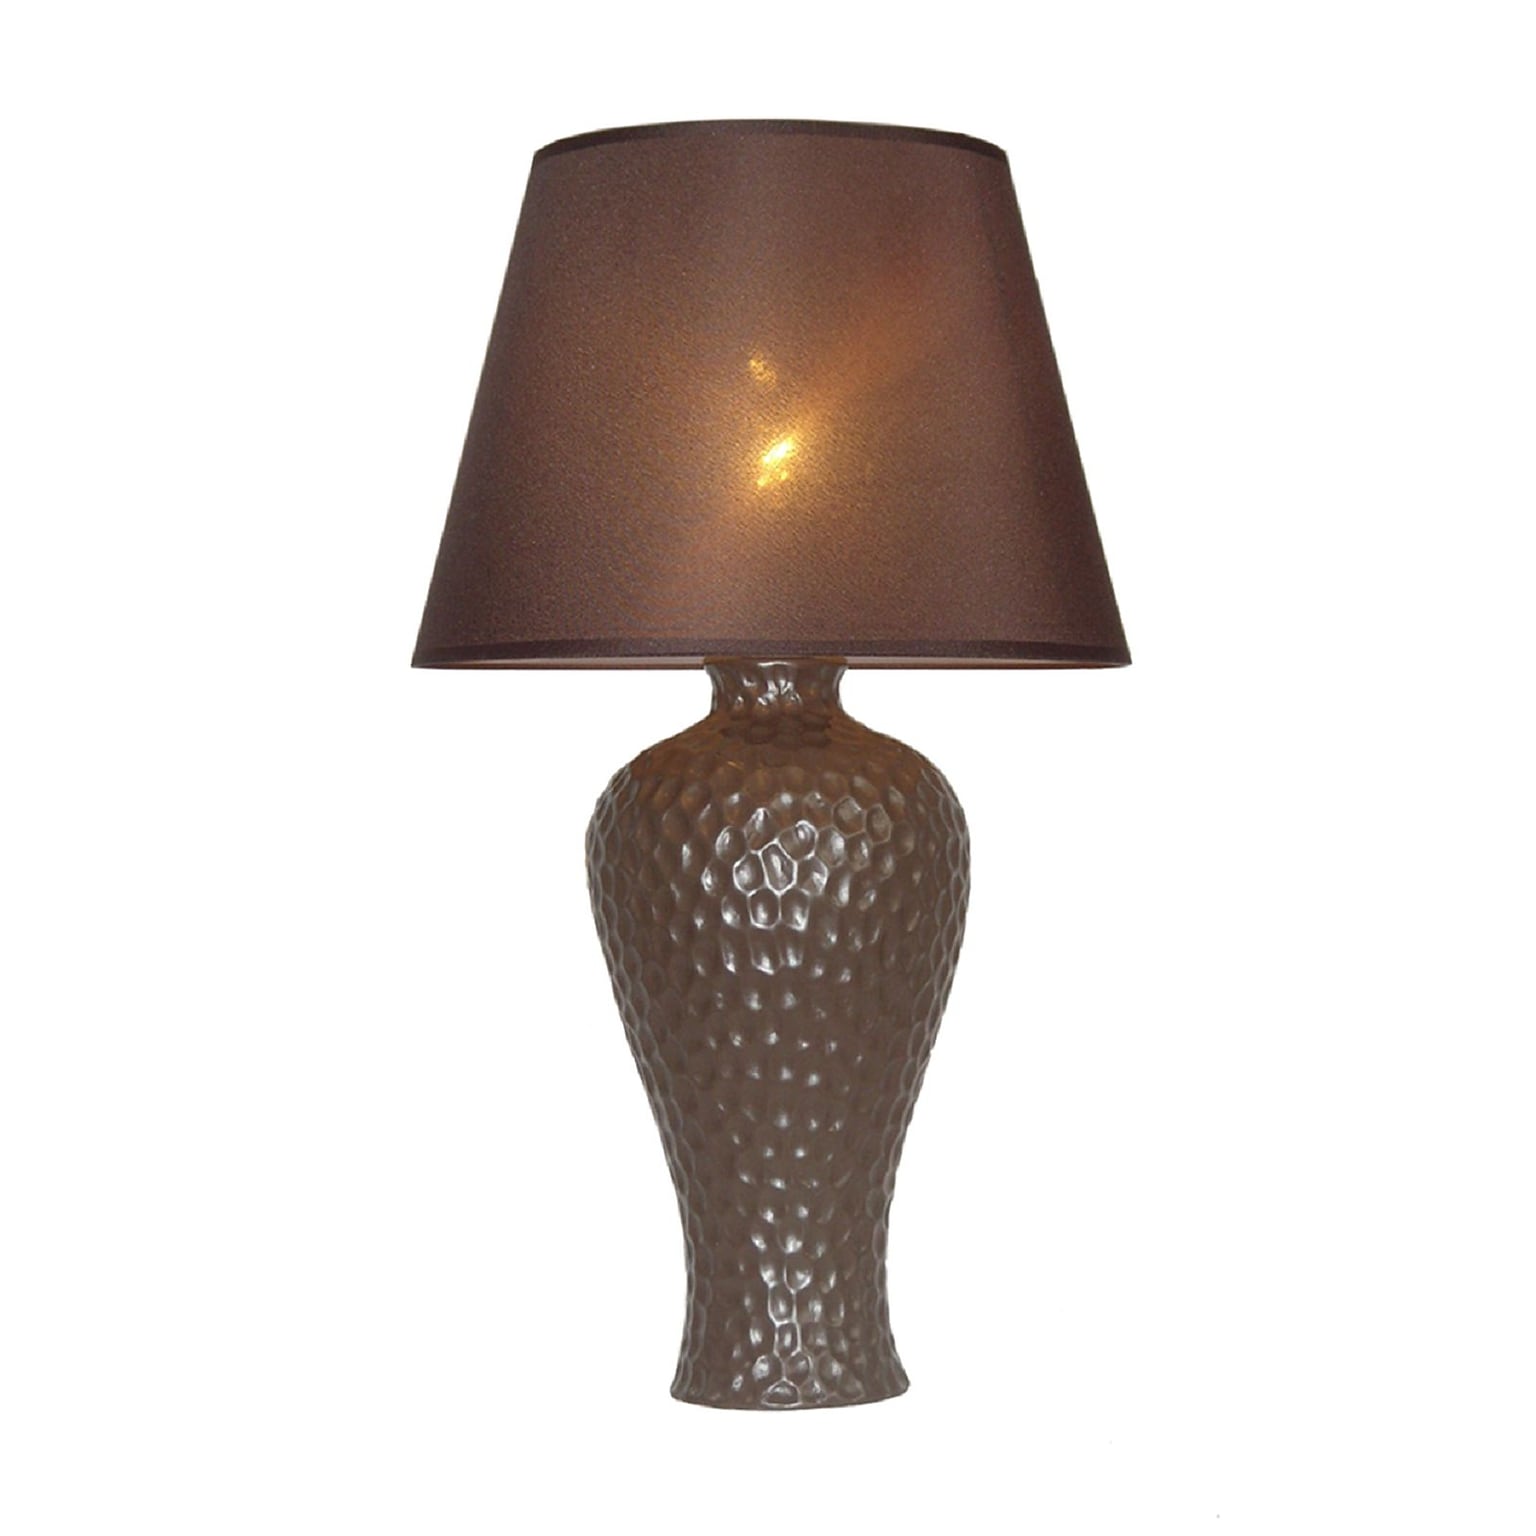 Simple Designs Texturized Curvy Ceramic Table Lamp, Brown Finish